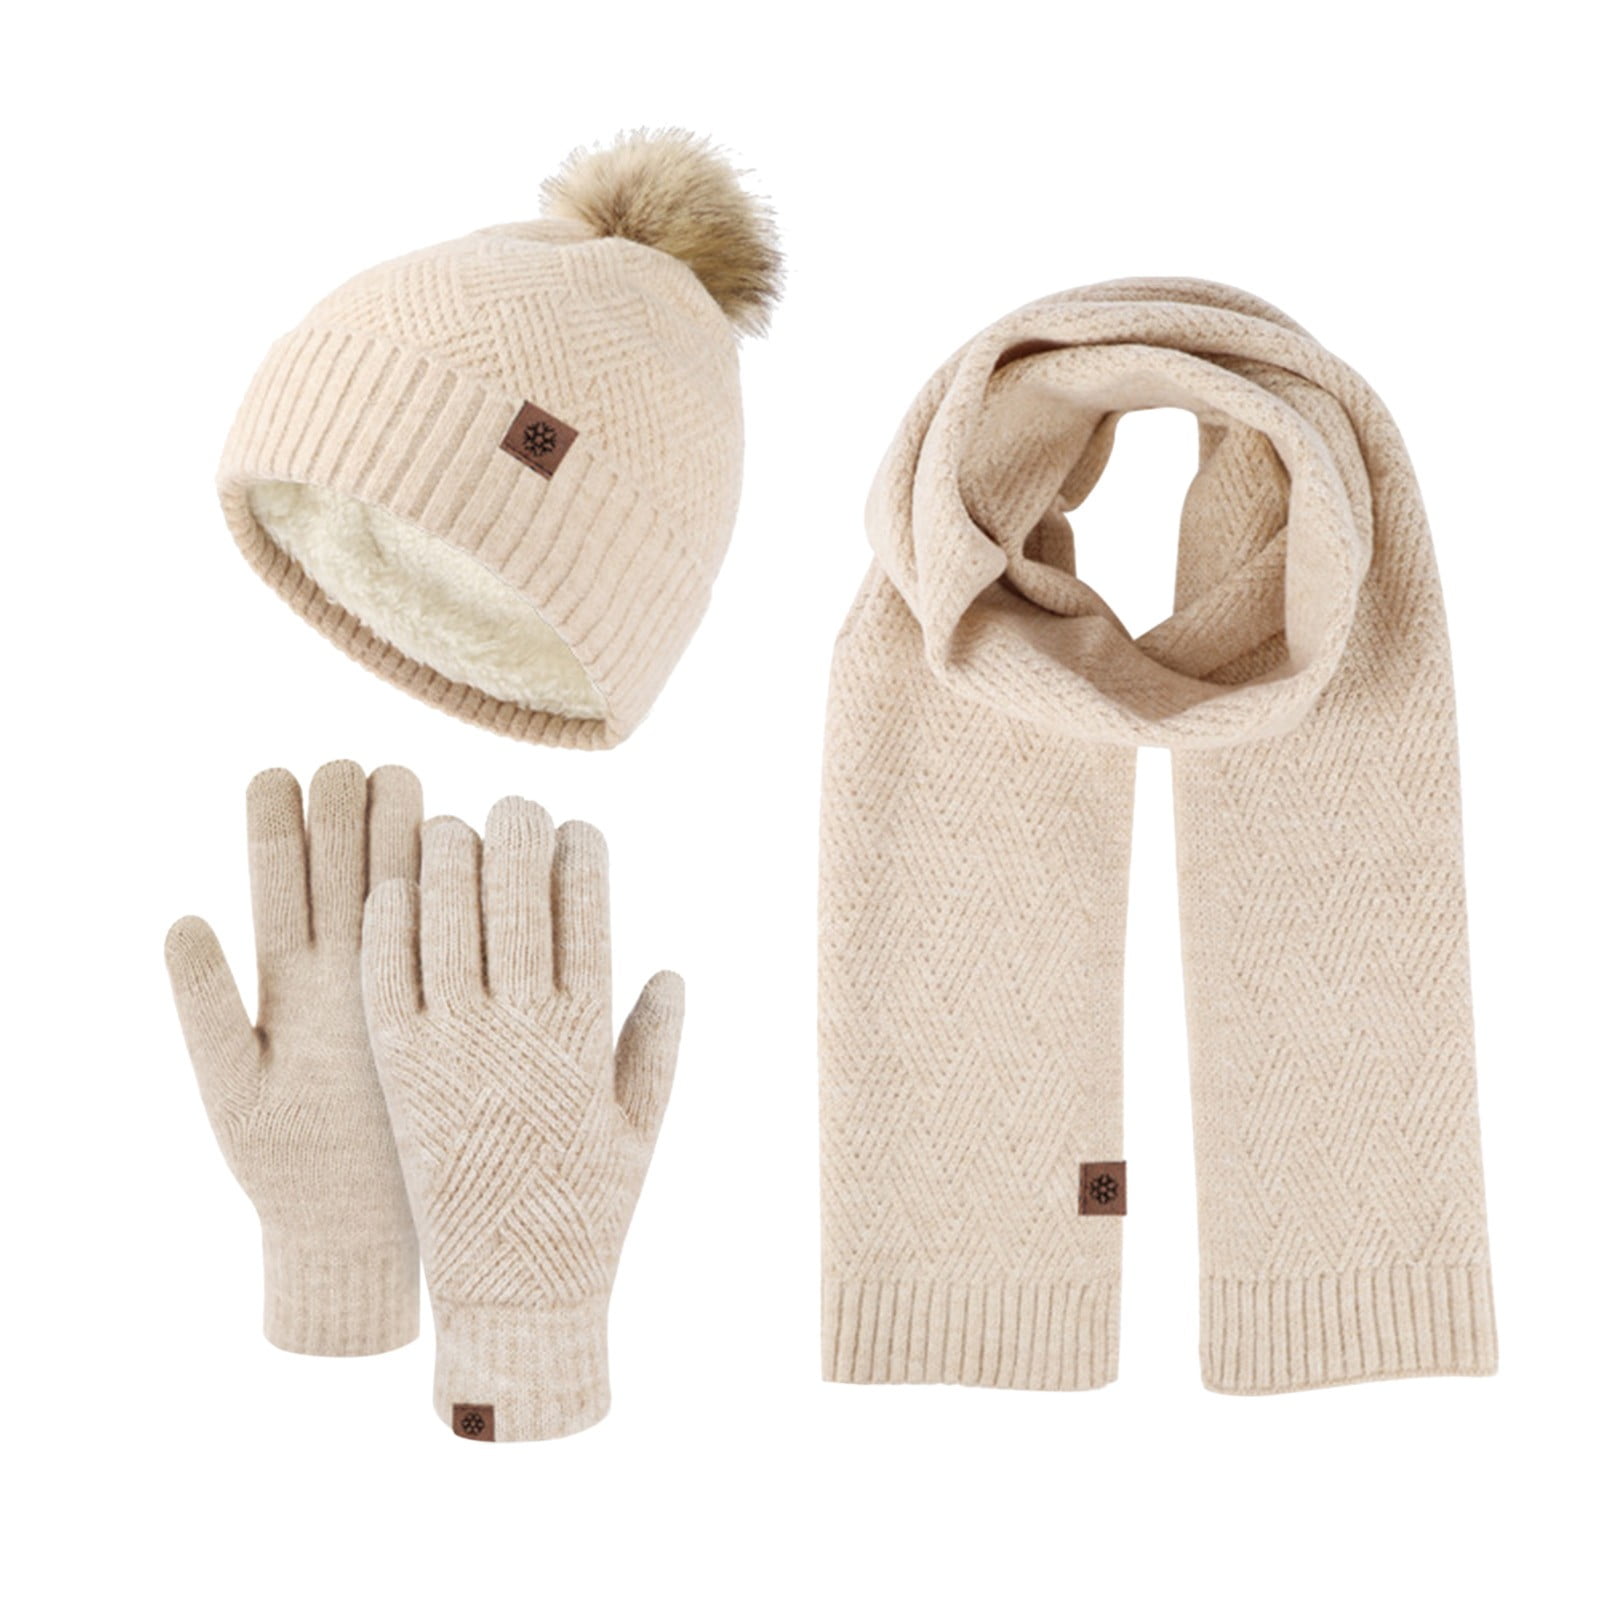 Hat Scarf And Glove Set Women Winter Hats 3 Piece Neck Warmer And Gloves -  